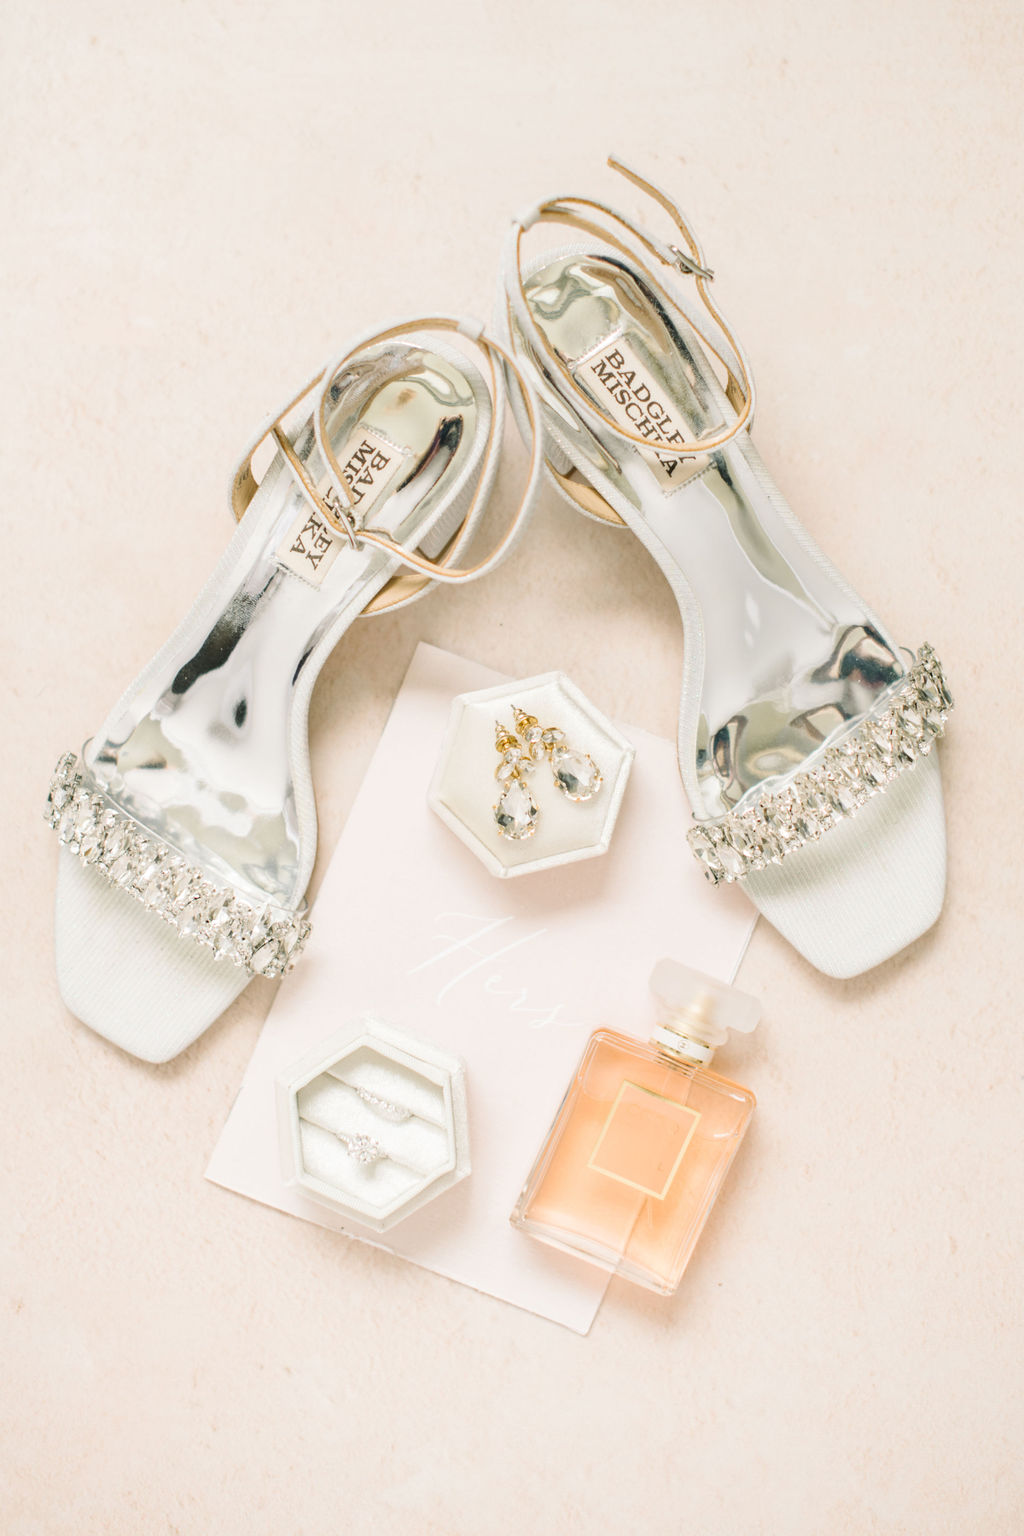 Styled bridal details including designer shoes by Badgley Mischka, peach perfume bottle, white hexagon ring box, and vow book. Spring wedding inspiration.